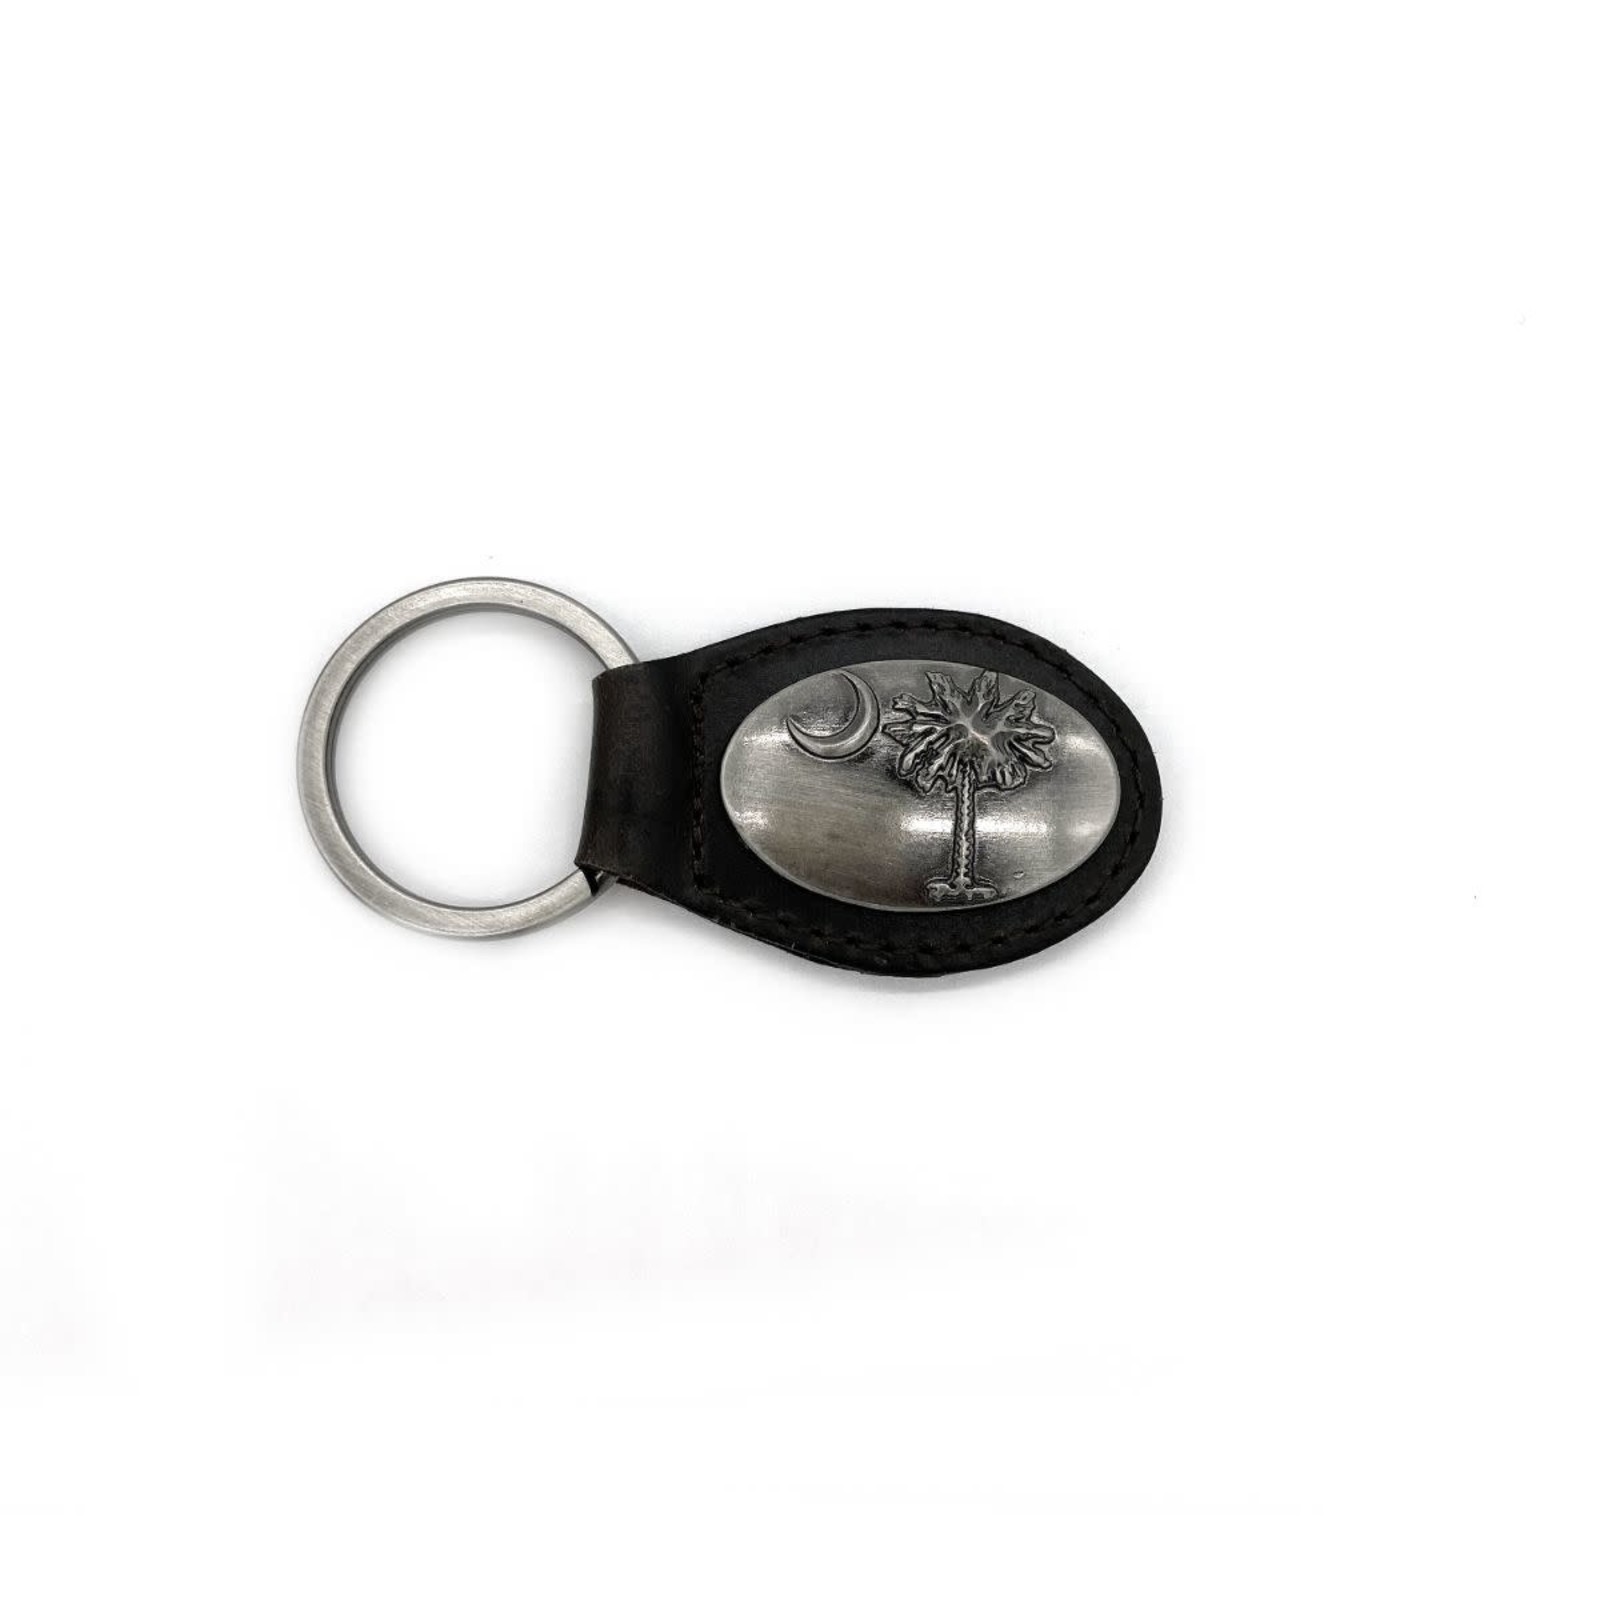 Zeppelin Products Key Chain-Palmetto       KL6-PALM-BRW loading=